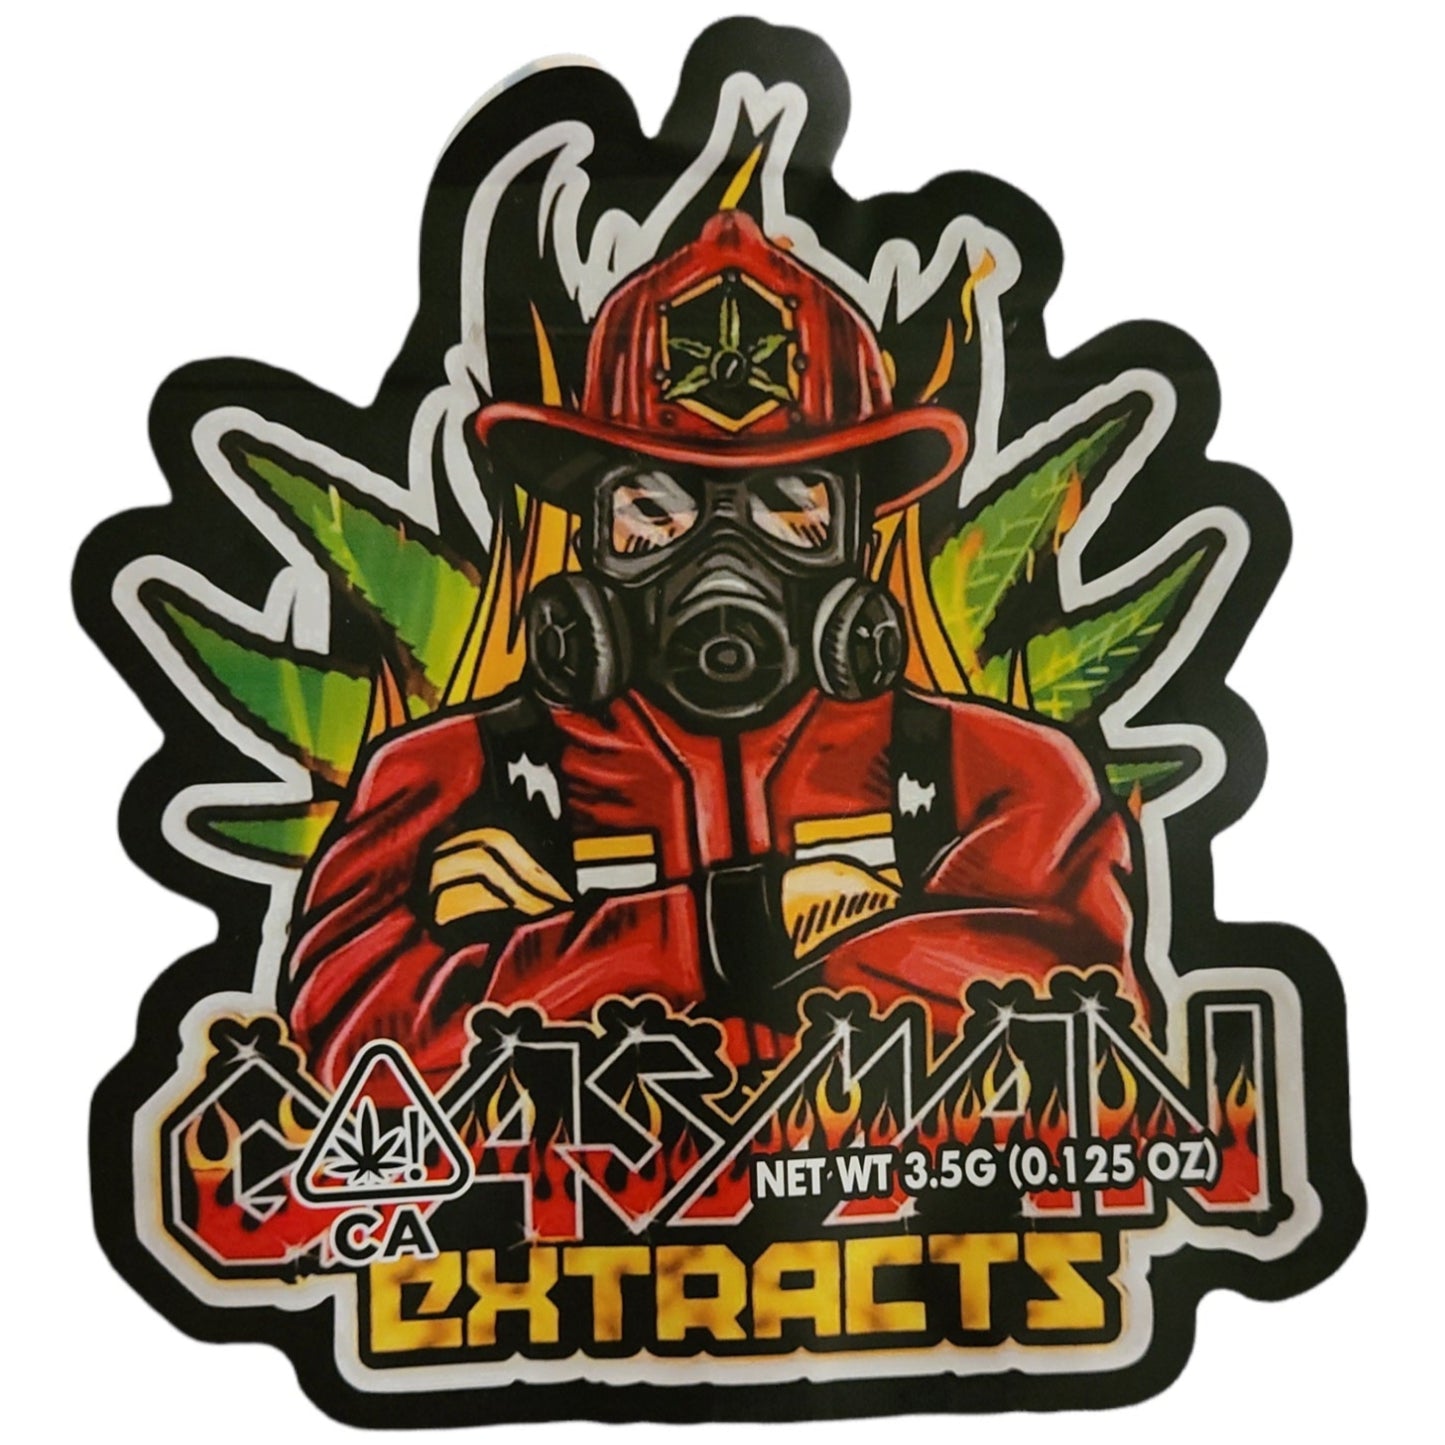 Gas Man Extracts 3.5G Mylar Bags